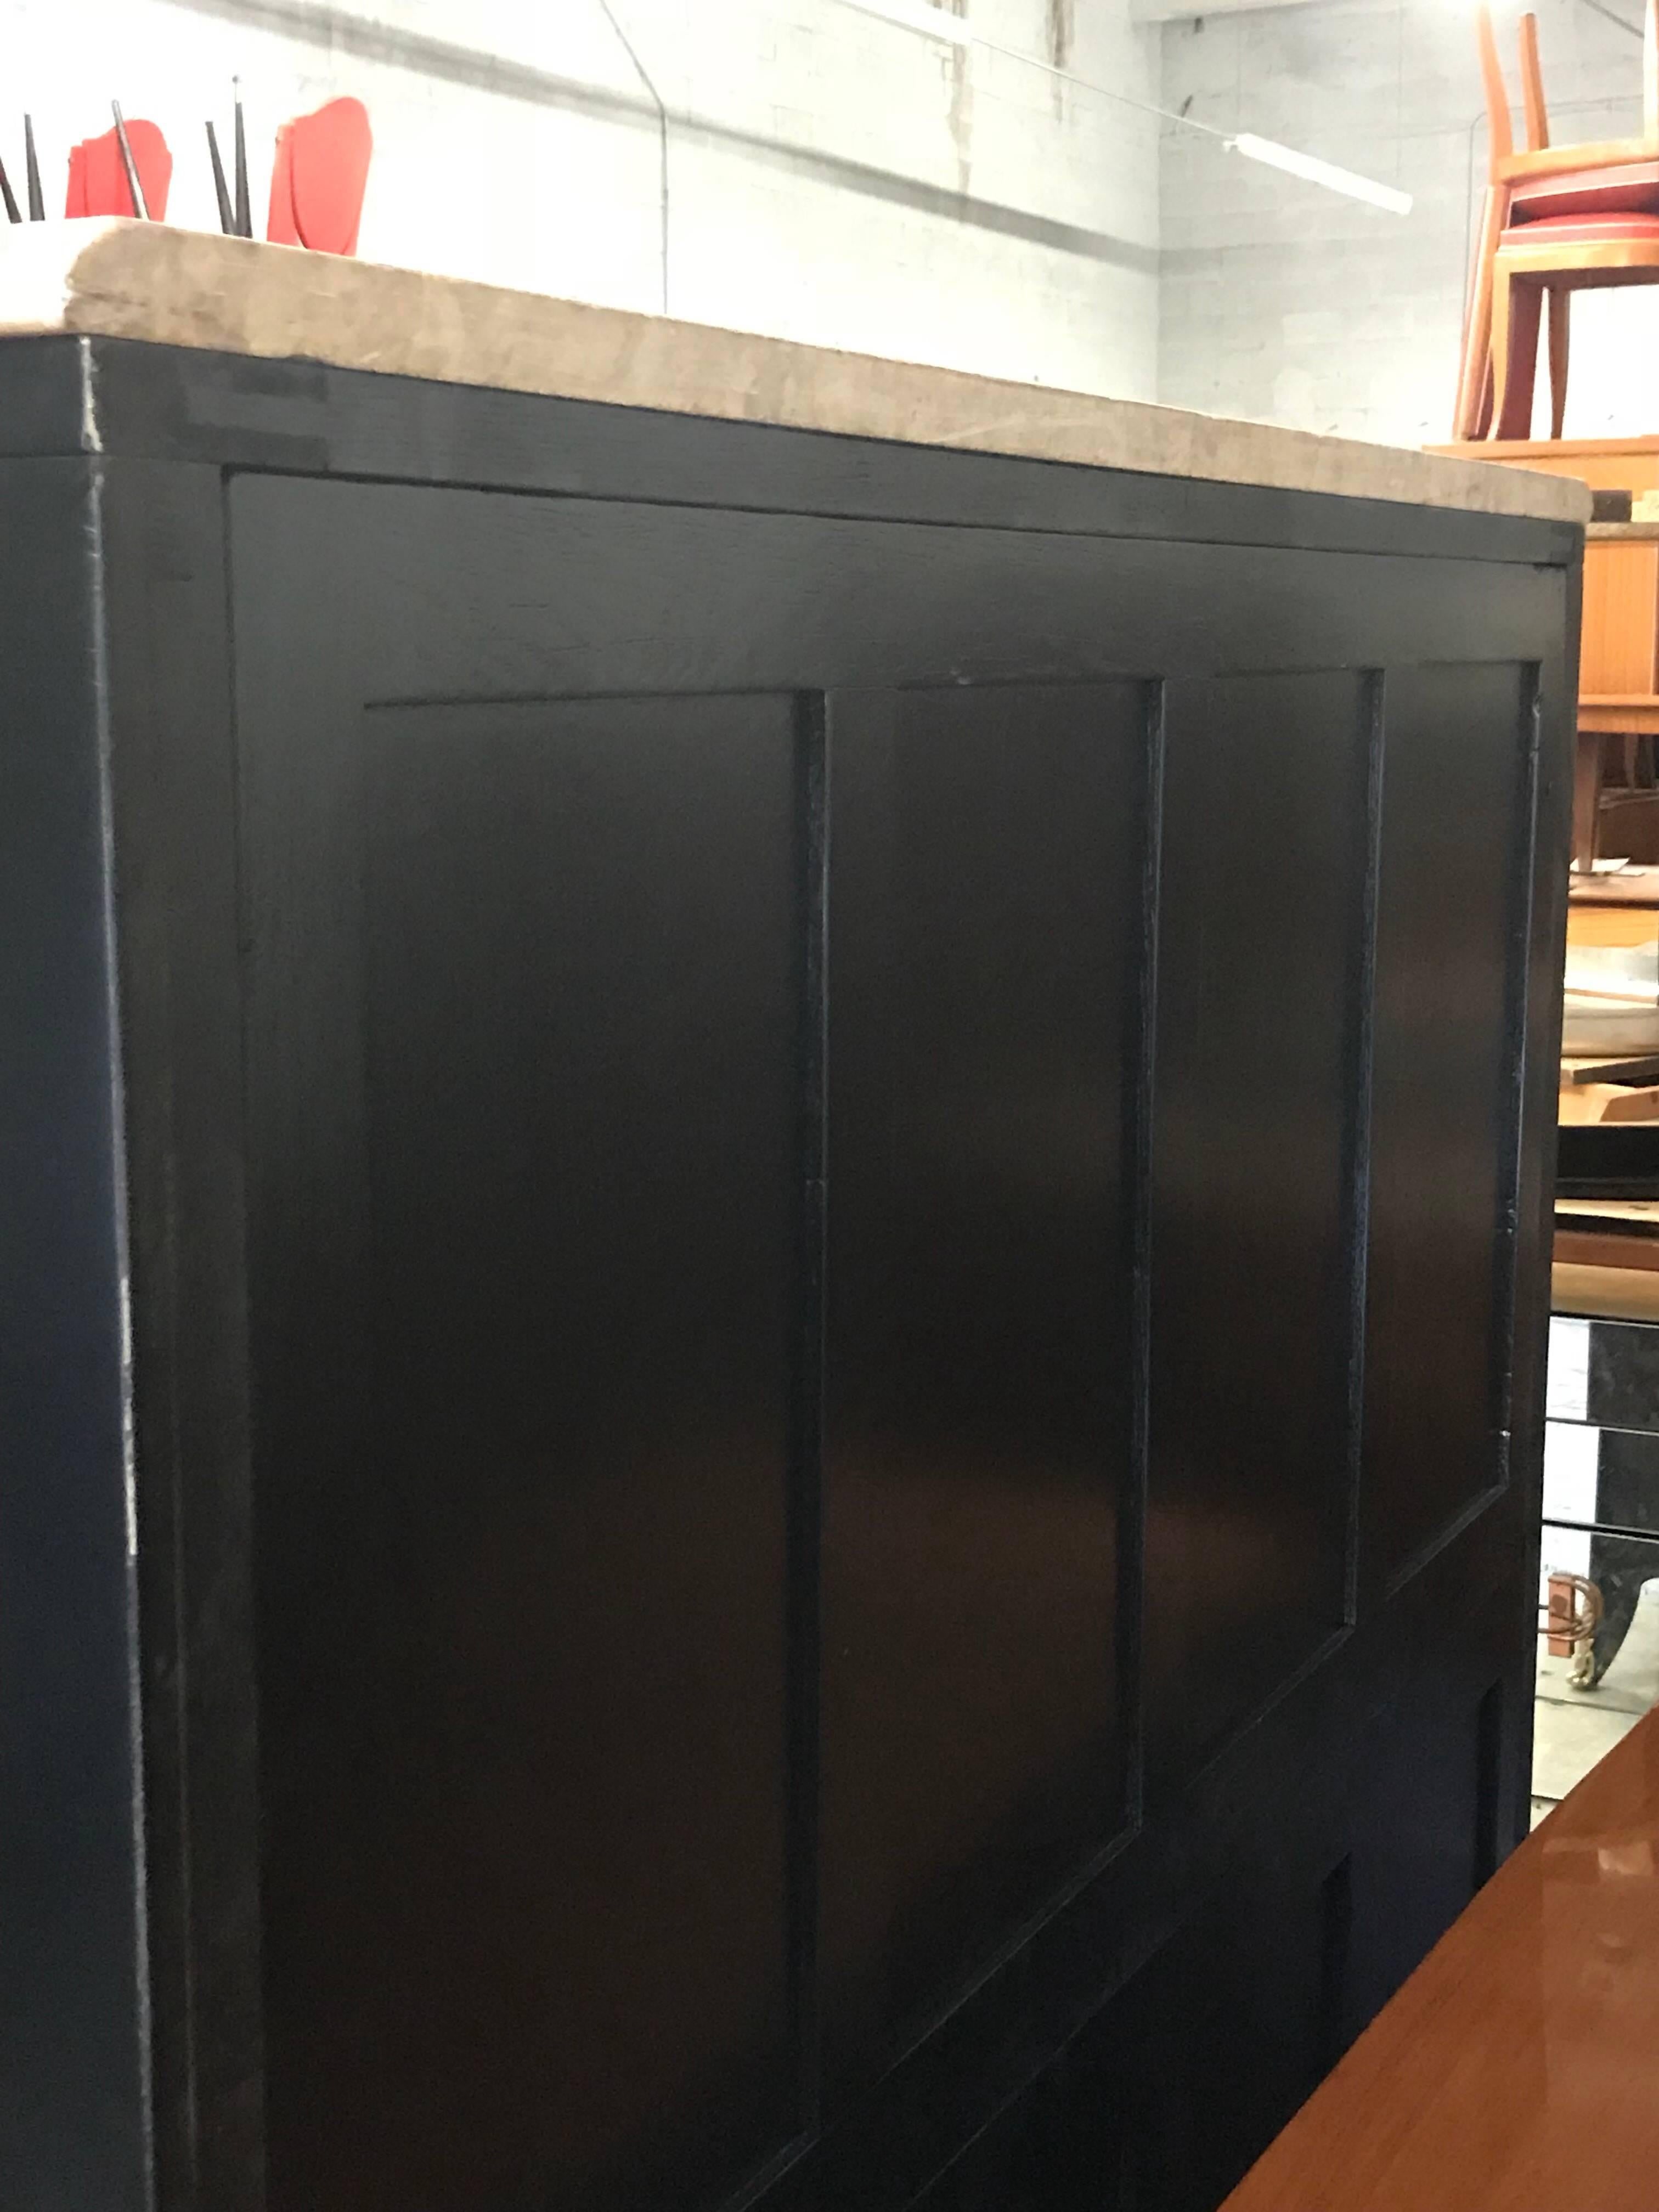 Monumental French Art Deco Ebonized Dry Bar Cabinet with Marble Top, 1940s For Sale 5